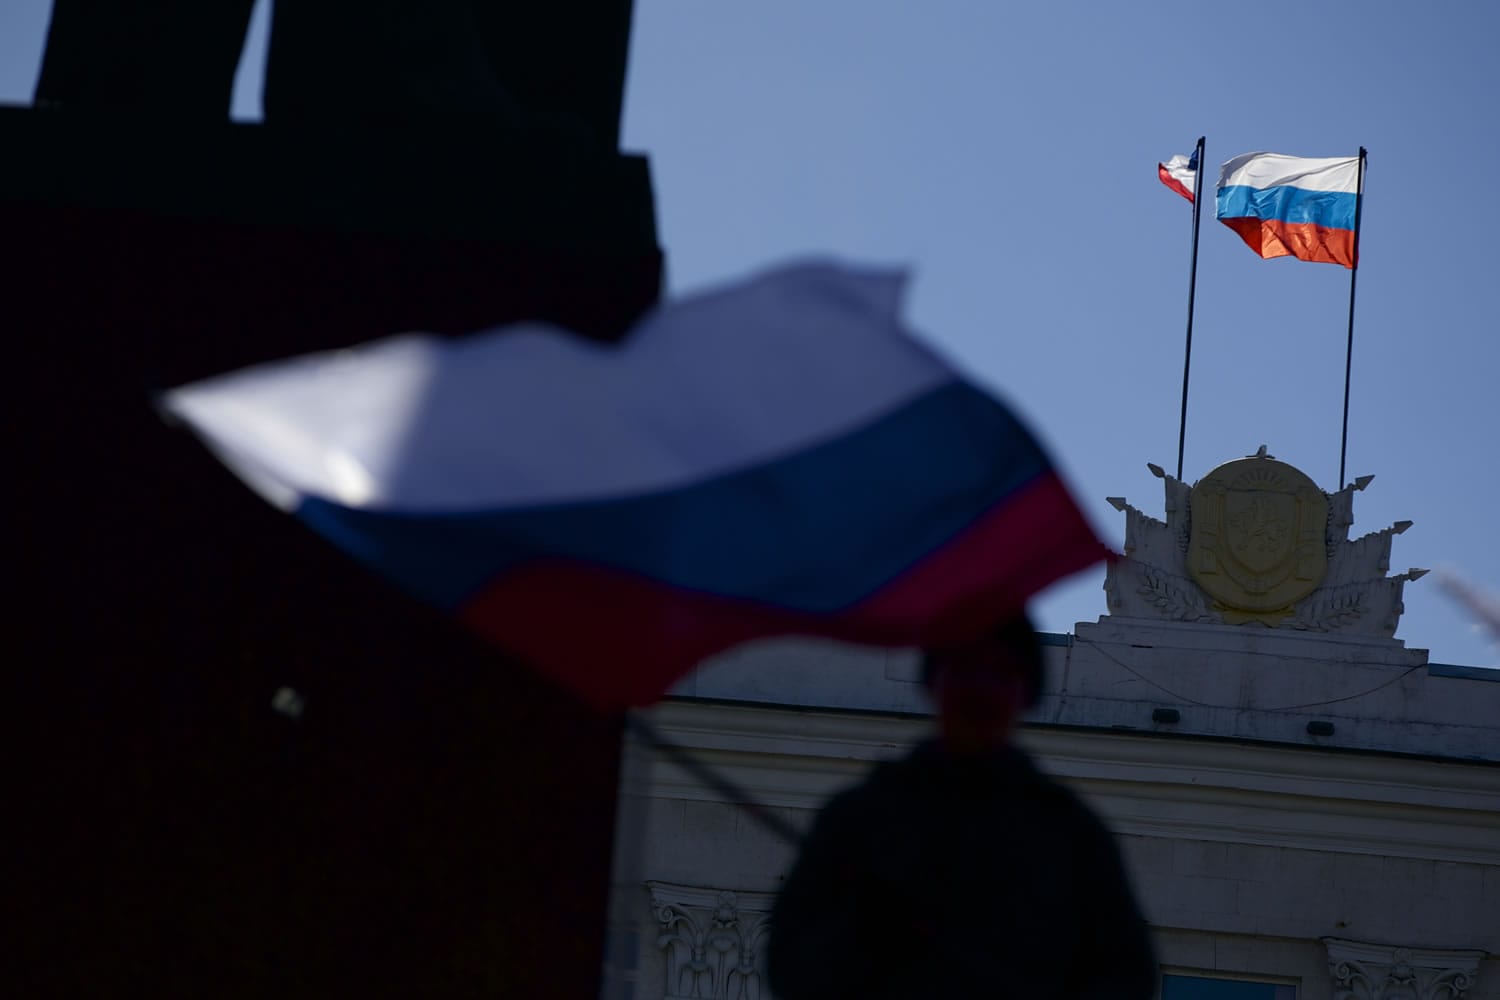 Russian and Crimean flags fly over a local government building in Simferopol, Ukraine, on Monday.